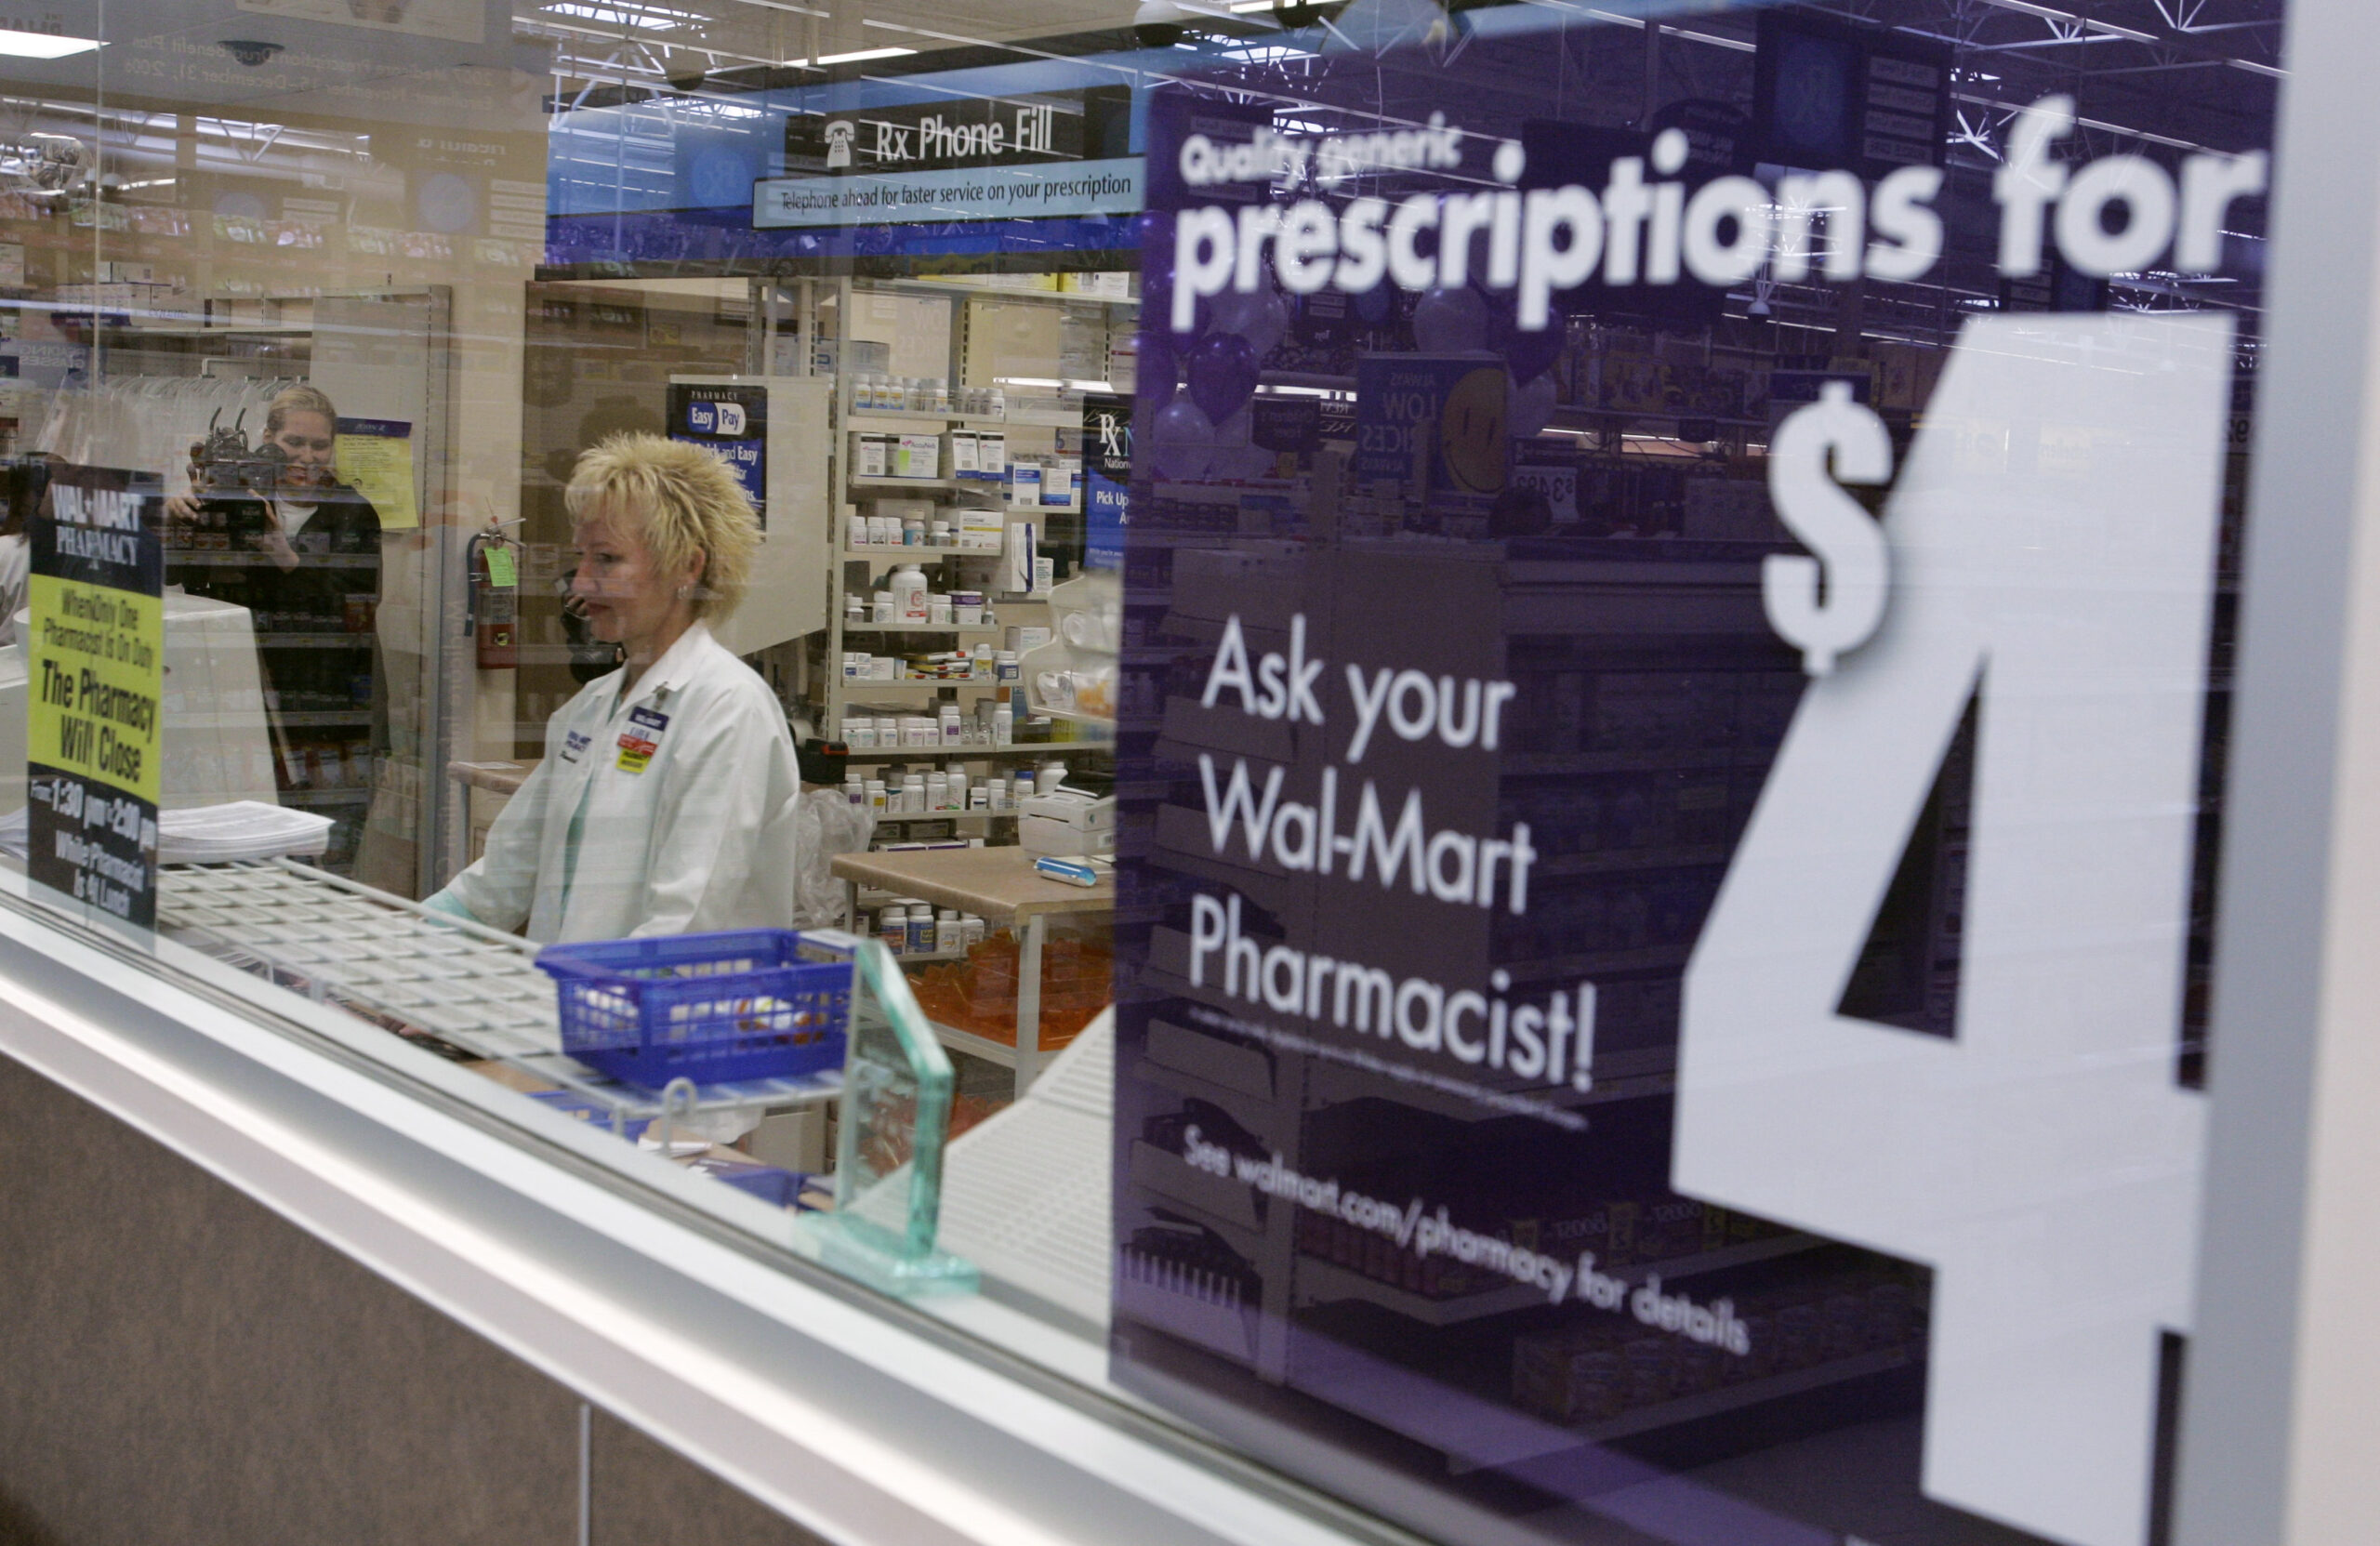 Doctors Tout Discount Cards For Drugs To Abate High Costs Of Prescriptions